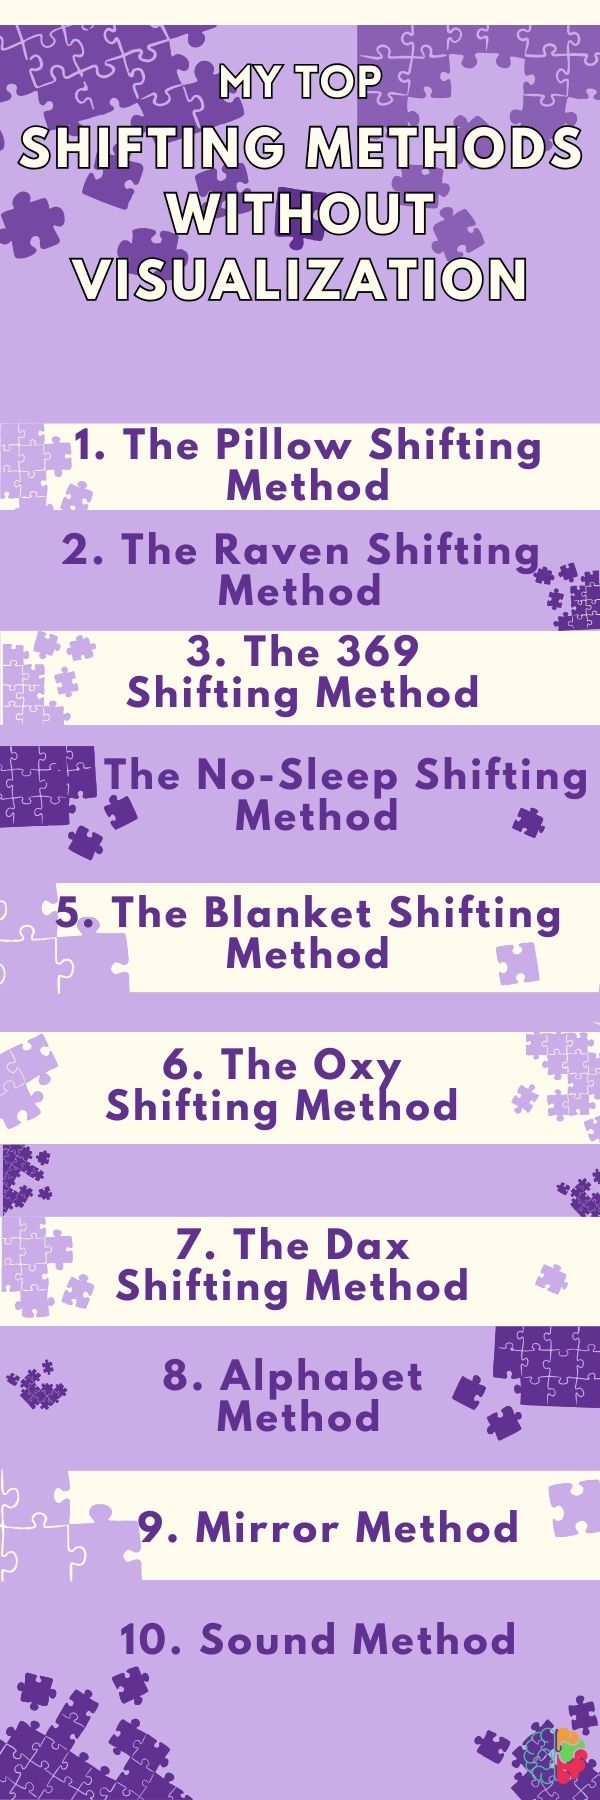 My Top 10 Shifting Methods Without Visualization